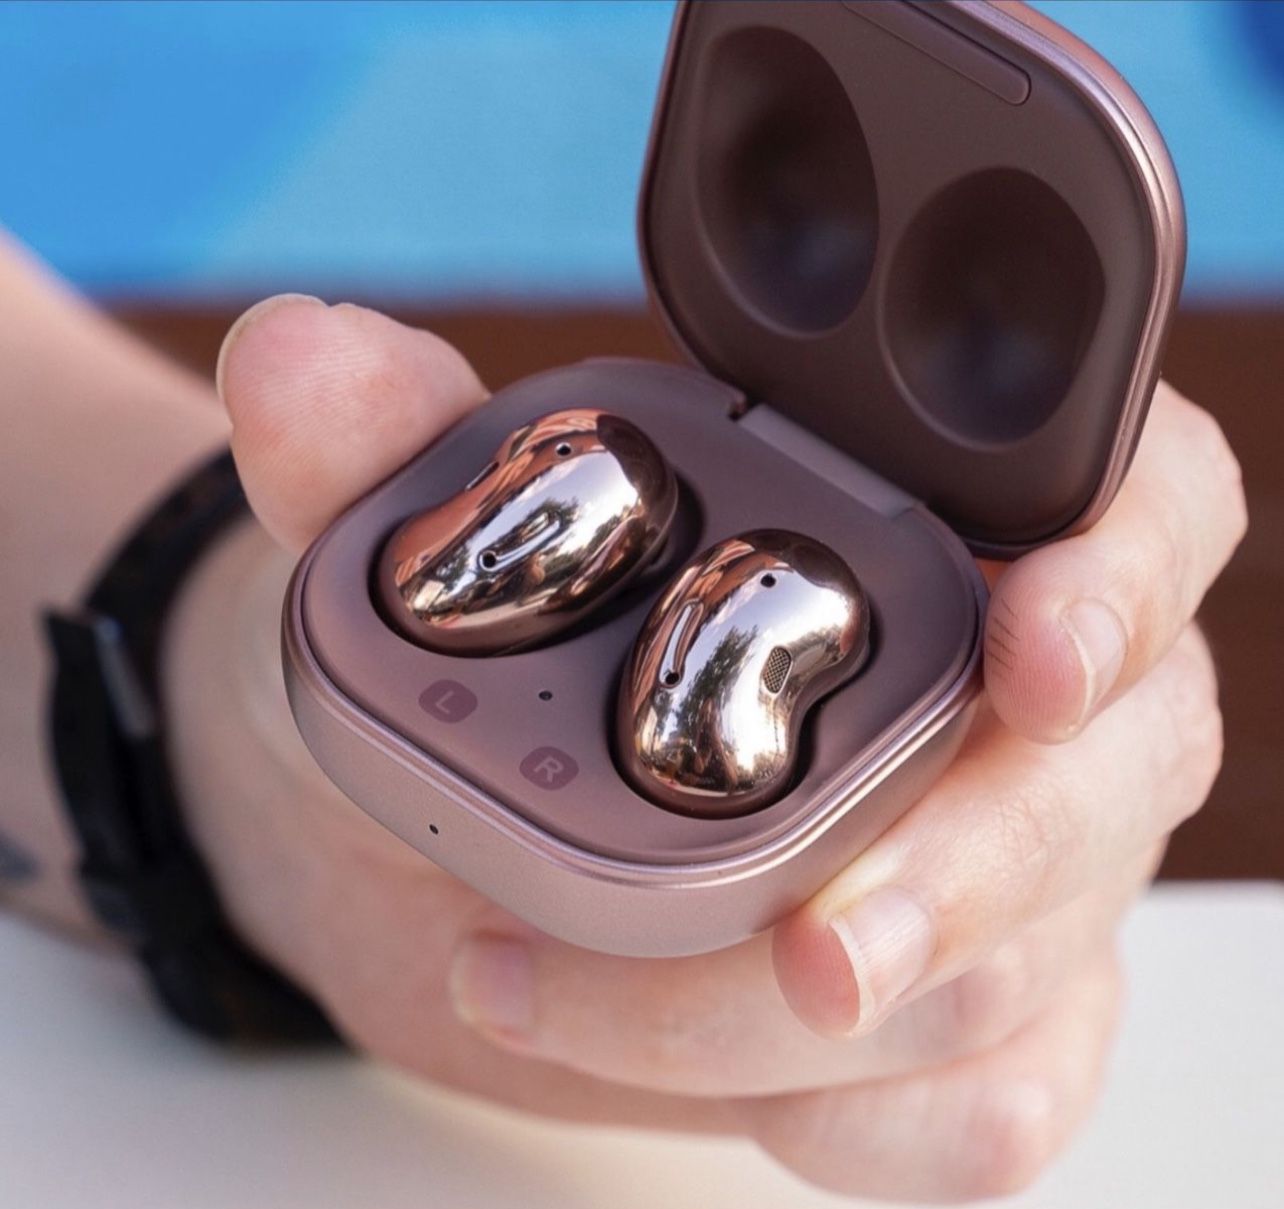  Samsung Galaxy Buds Live, True Wireless Earbuds Wireless Charging Case Included)Mystic Bronze 